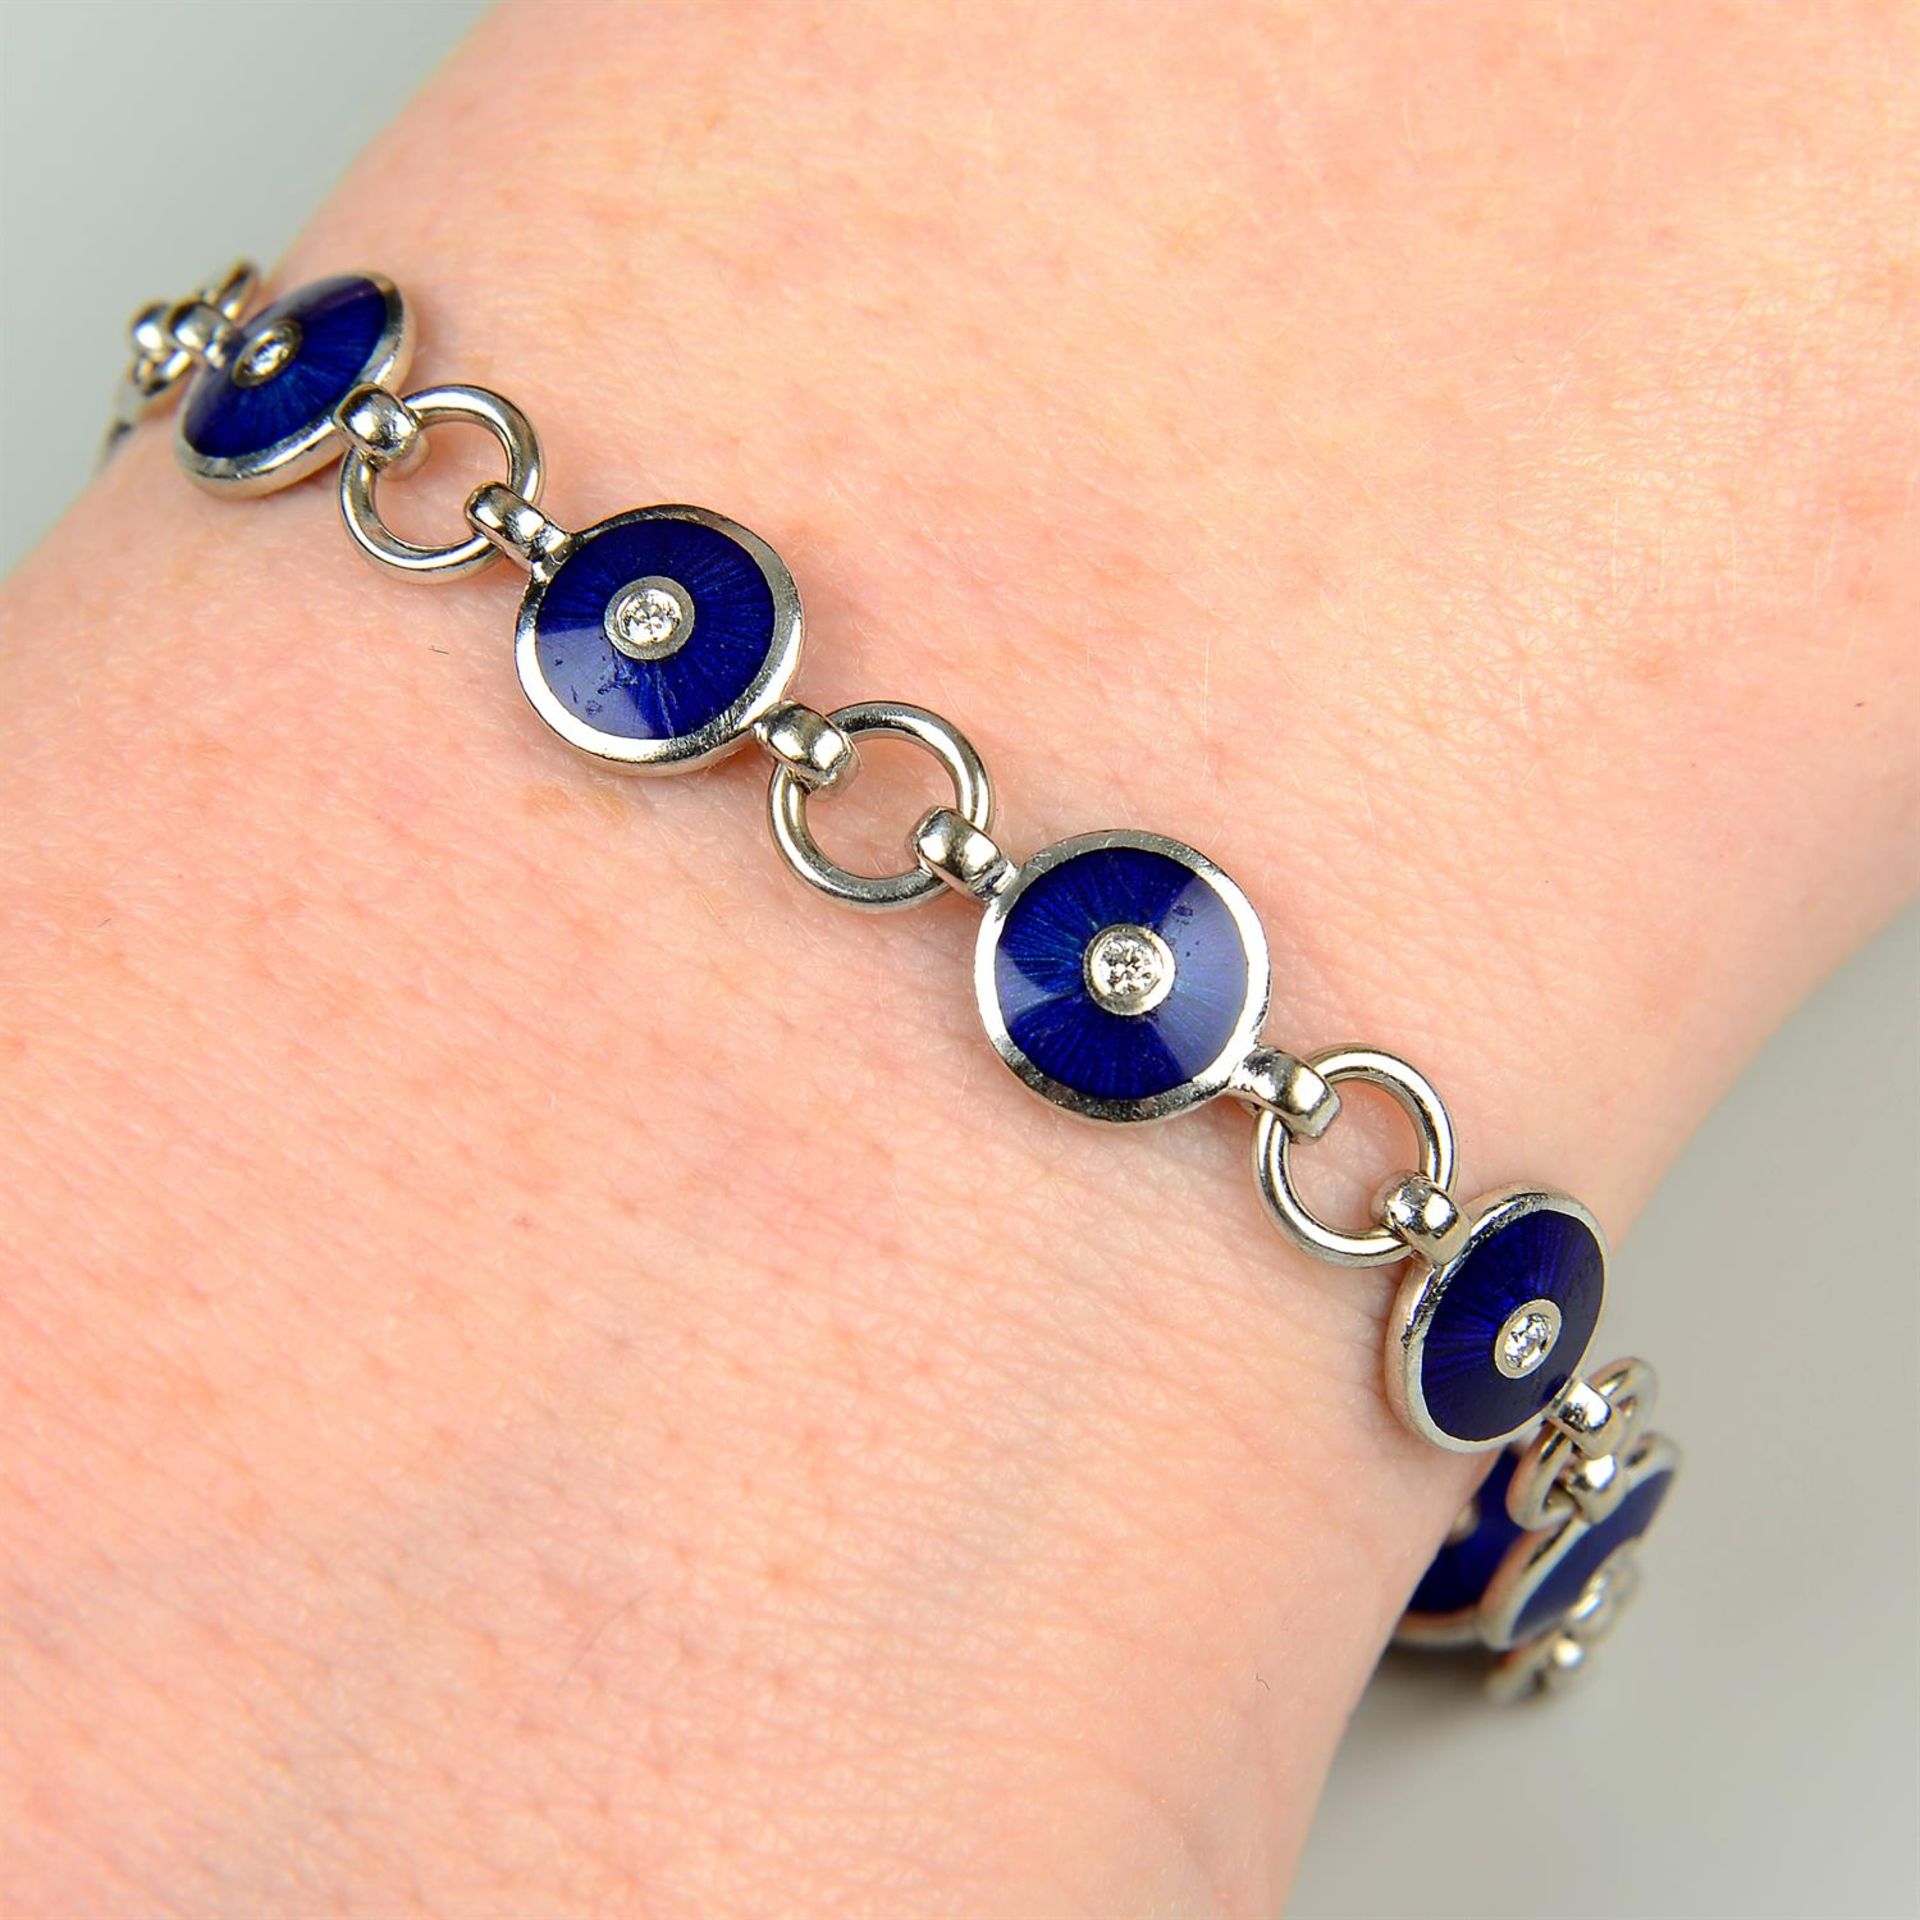 A limited edition diamond and blue enamel bracelet, by Victor Mayer for Fabergé.